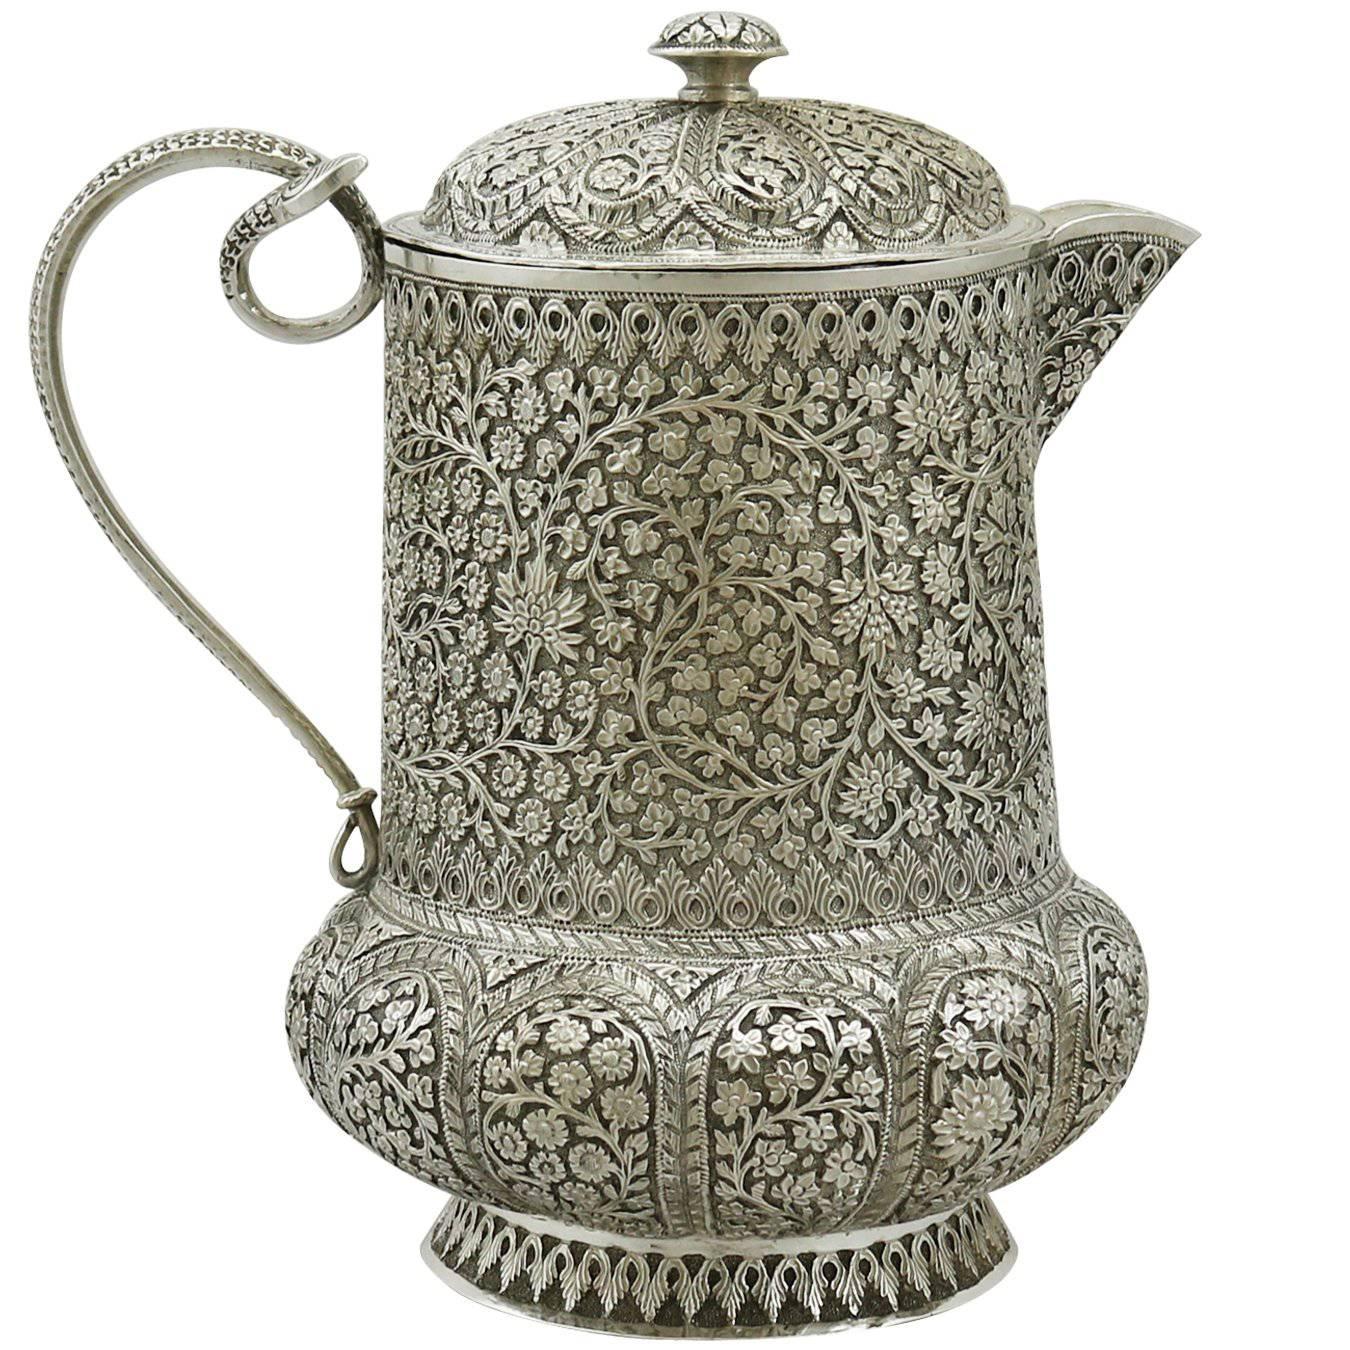 1880s Antique Indian Silver Water Jug